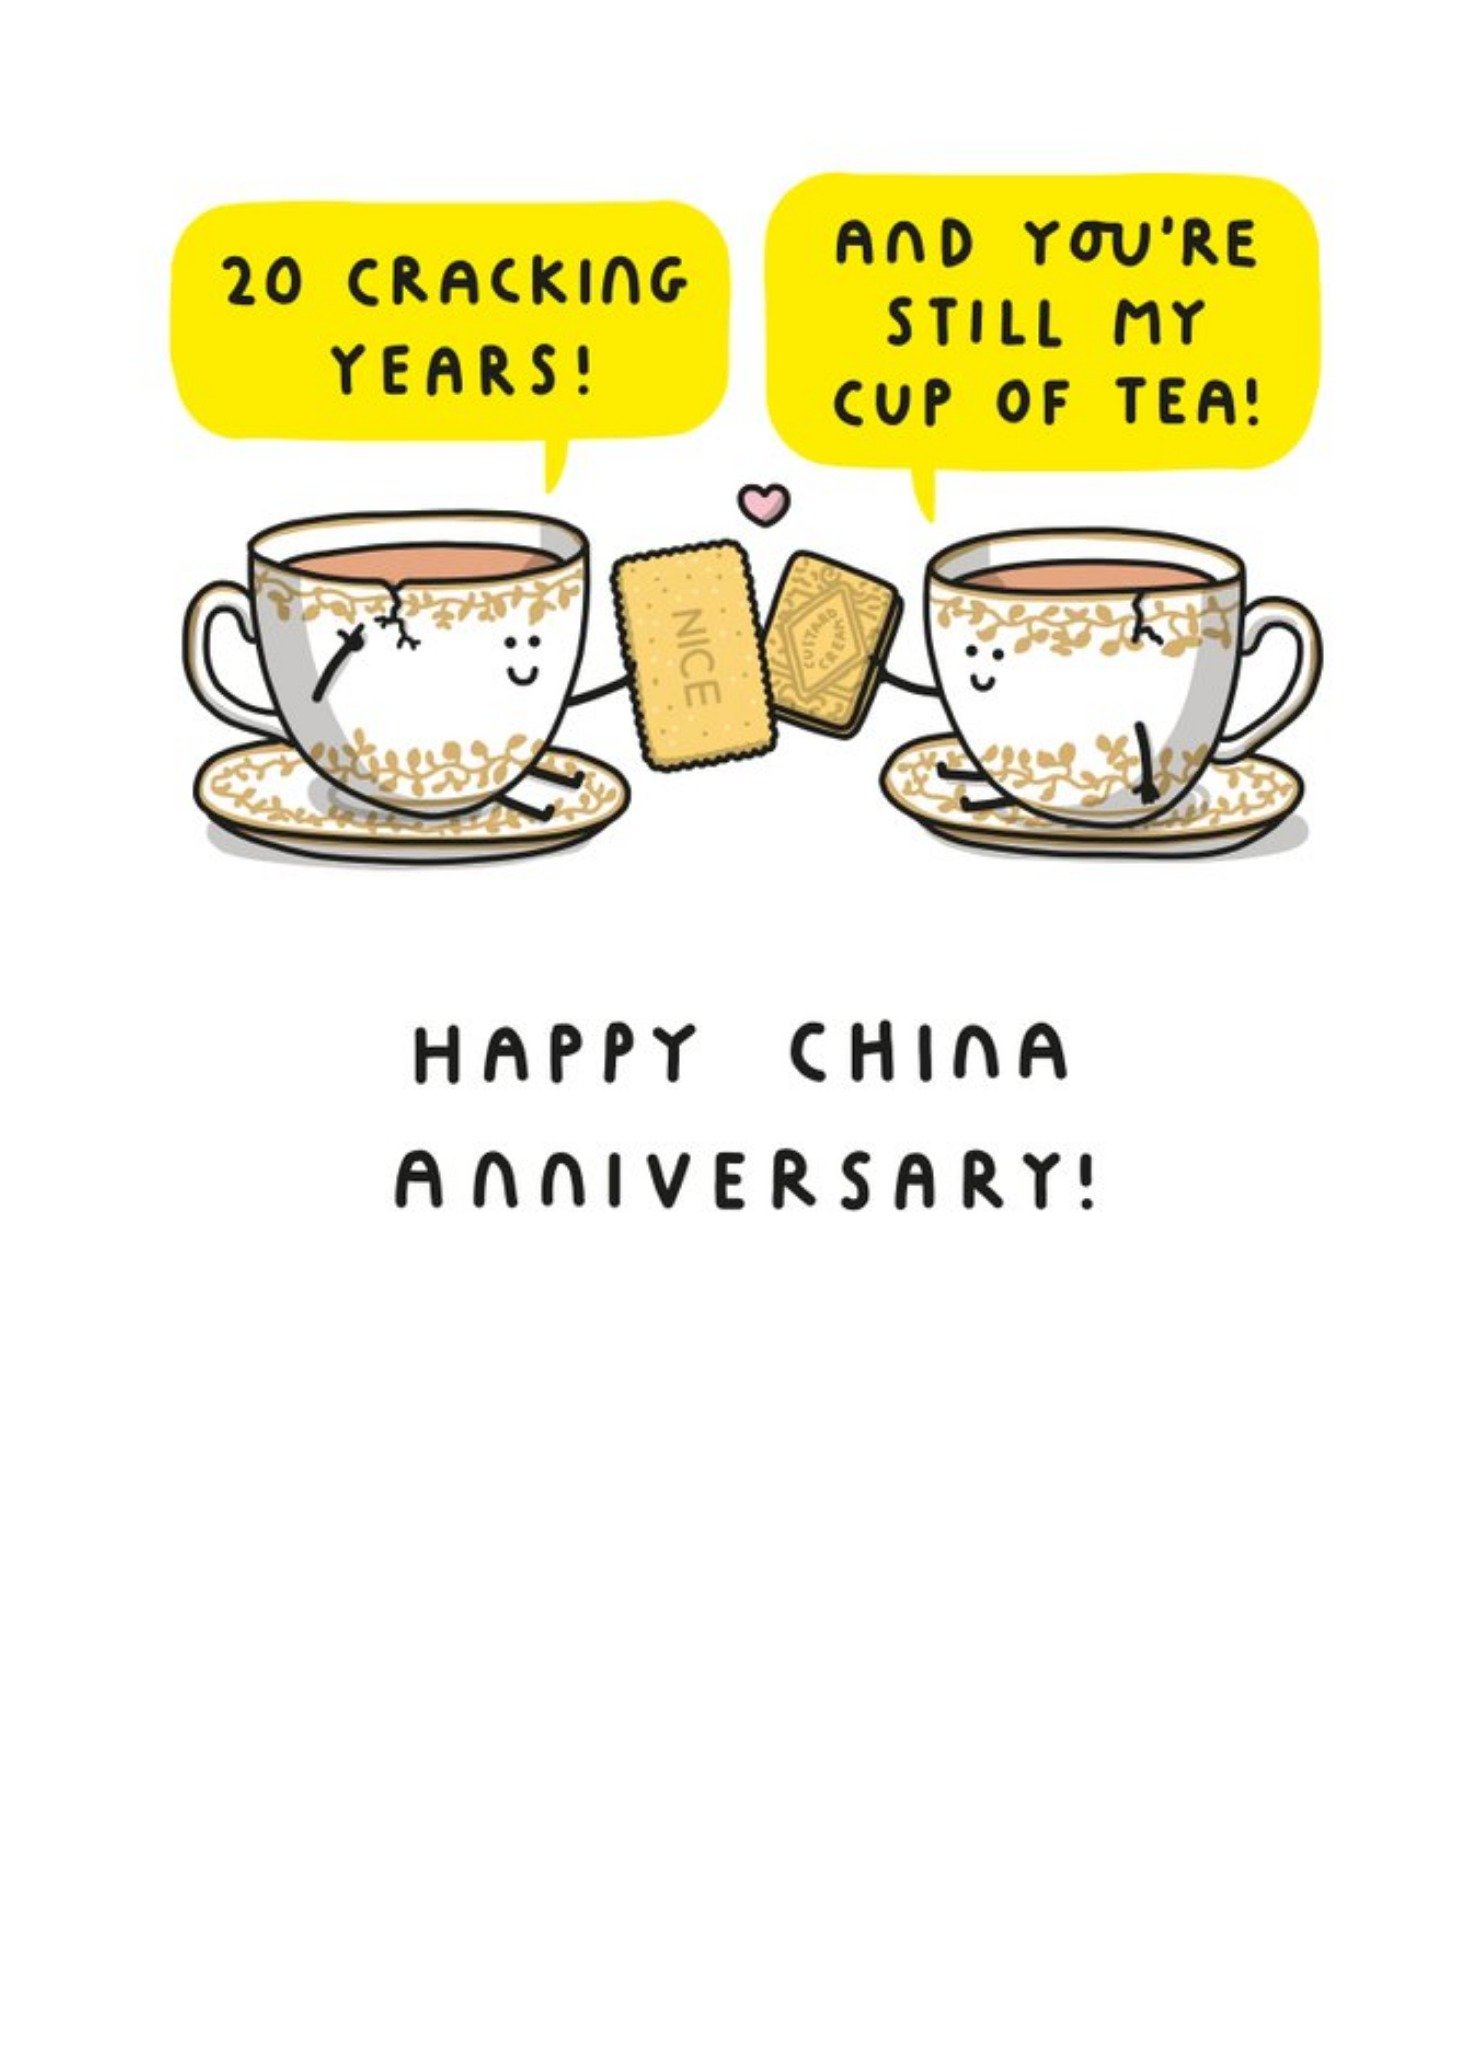 Moonpig Two Tea Cups Toasting With Biscuits Cartoon Illustration Twentieth Anniversary Funny Pun Car